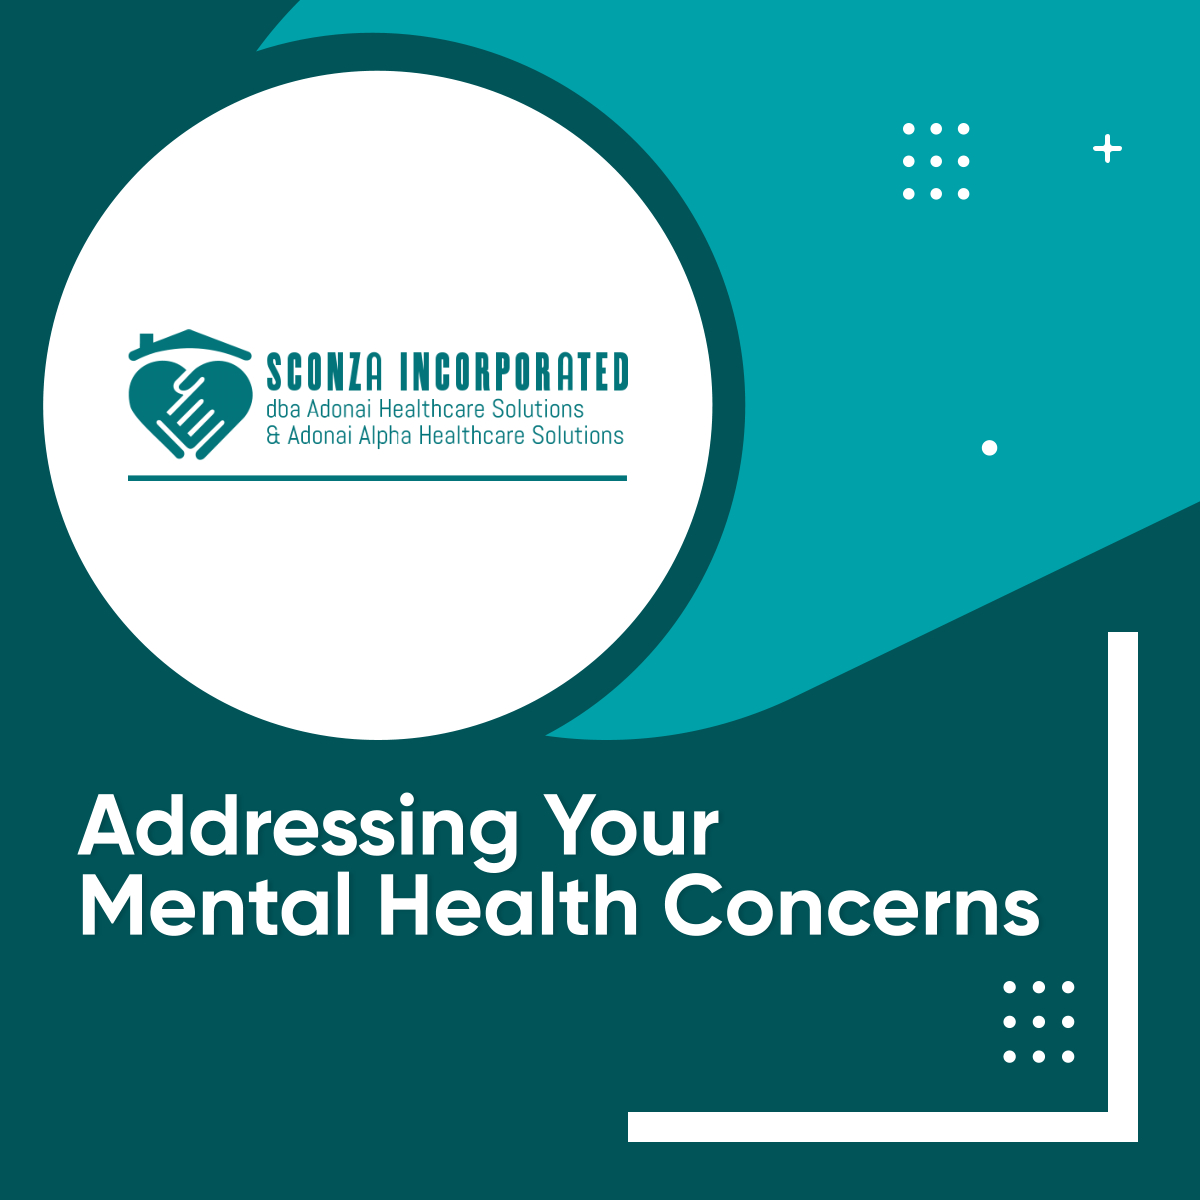 We have an outpatient mental health clinic where you could get evaluations, assessments, and therapy services to address any mental health concerns you may have.

Schedule a visit to our outpatient mental health clinic today! 

#MentalHealthConcerns #MentalHealthClinic